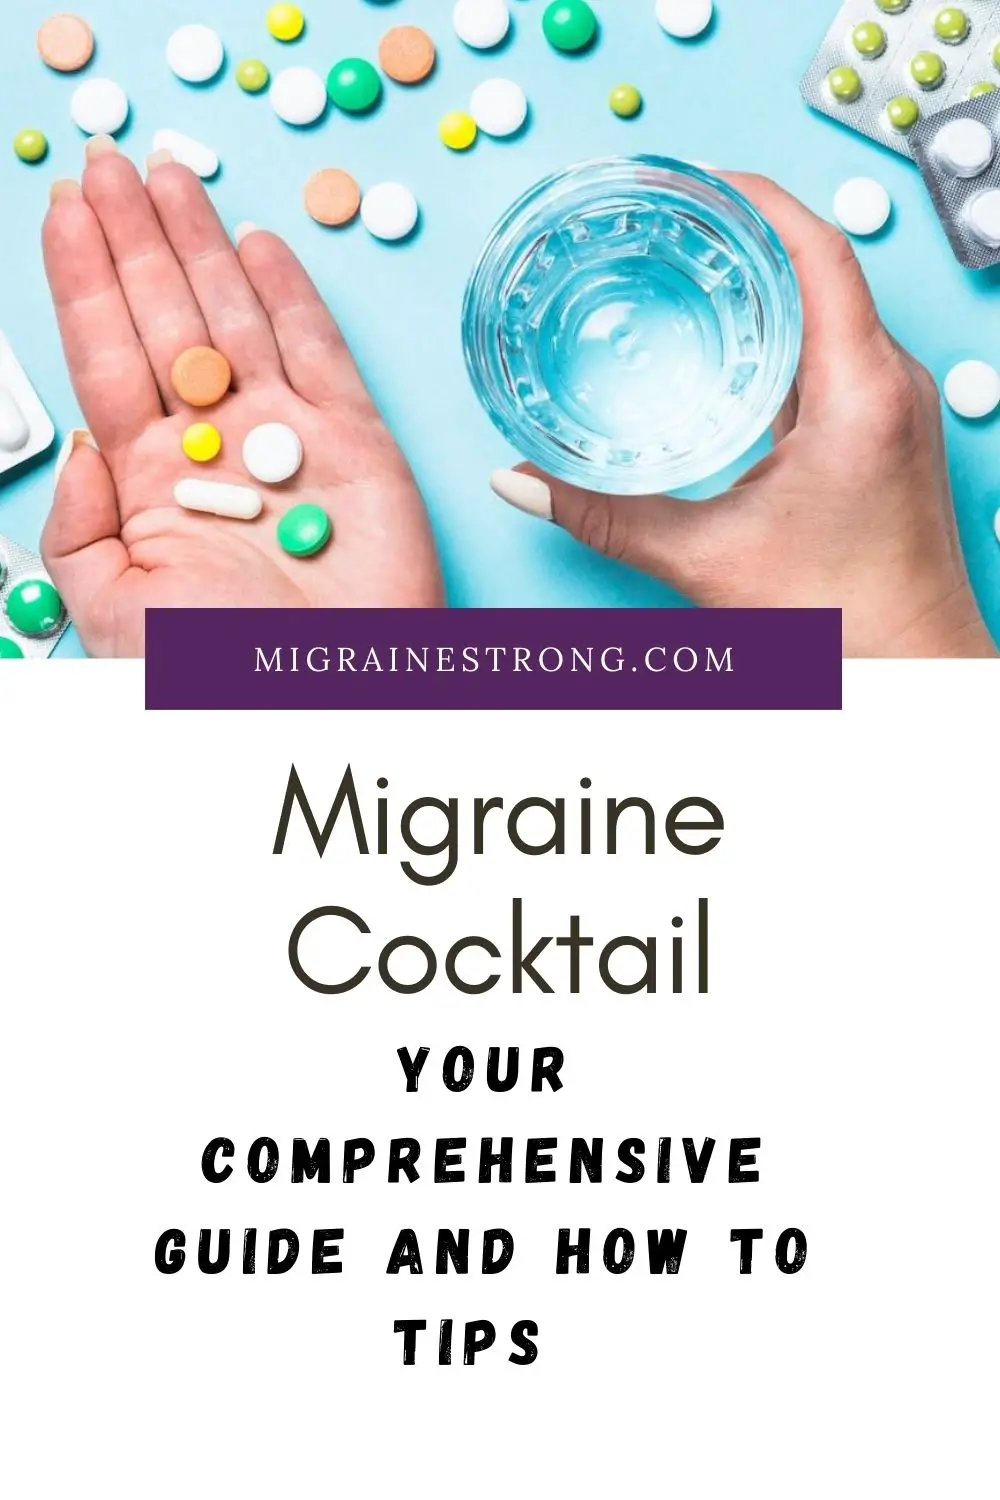 Migraine Cocktail: Your Comprehensive Guide and Helpful How To Tips